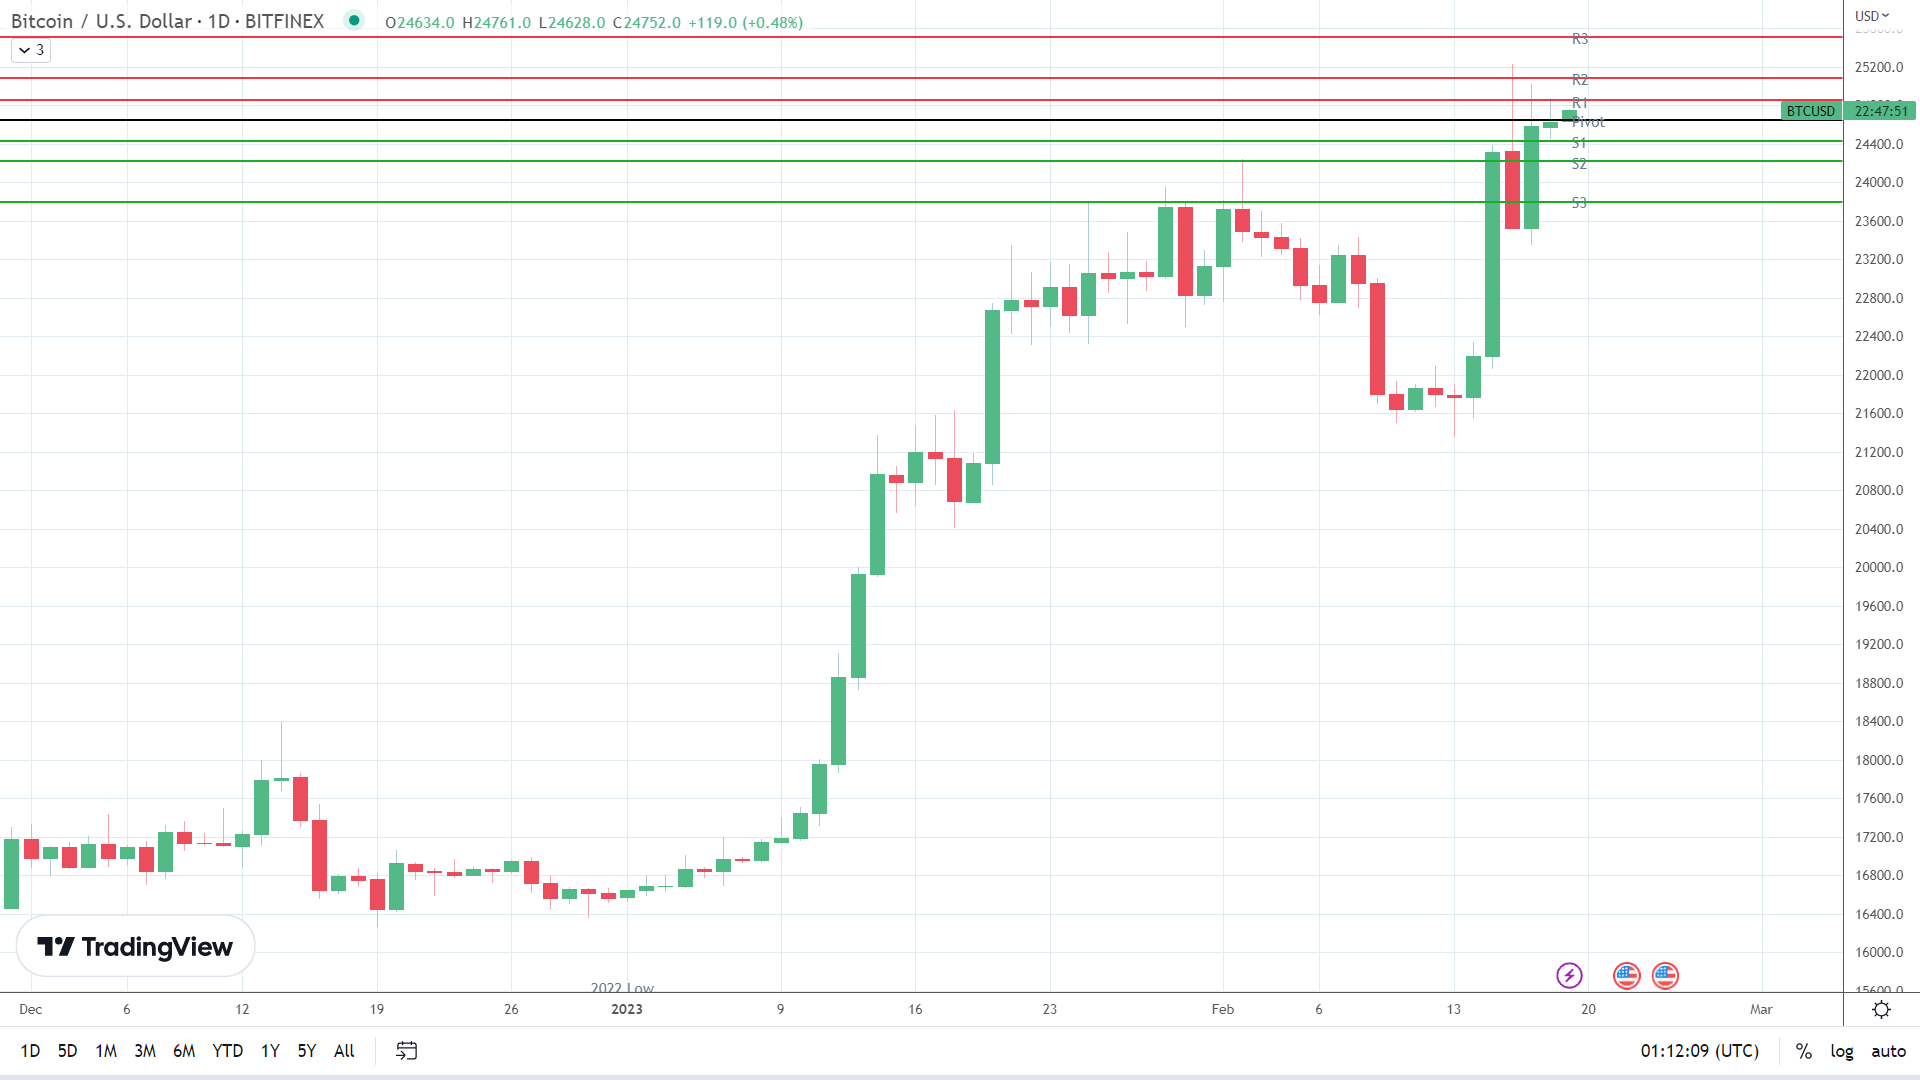 BTC finds support.